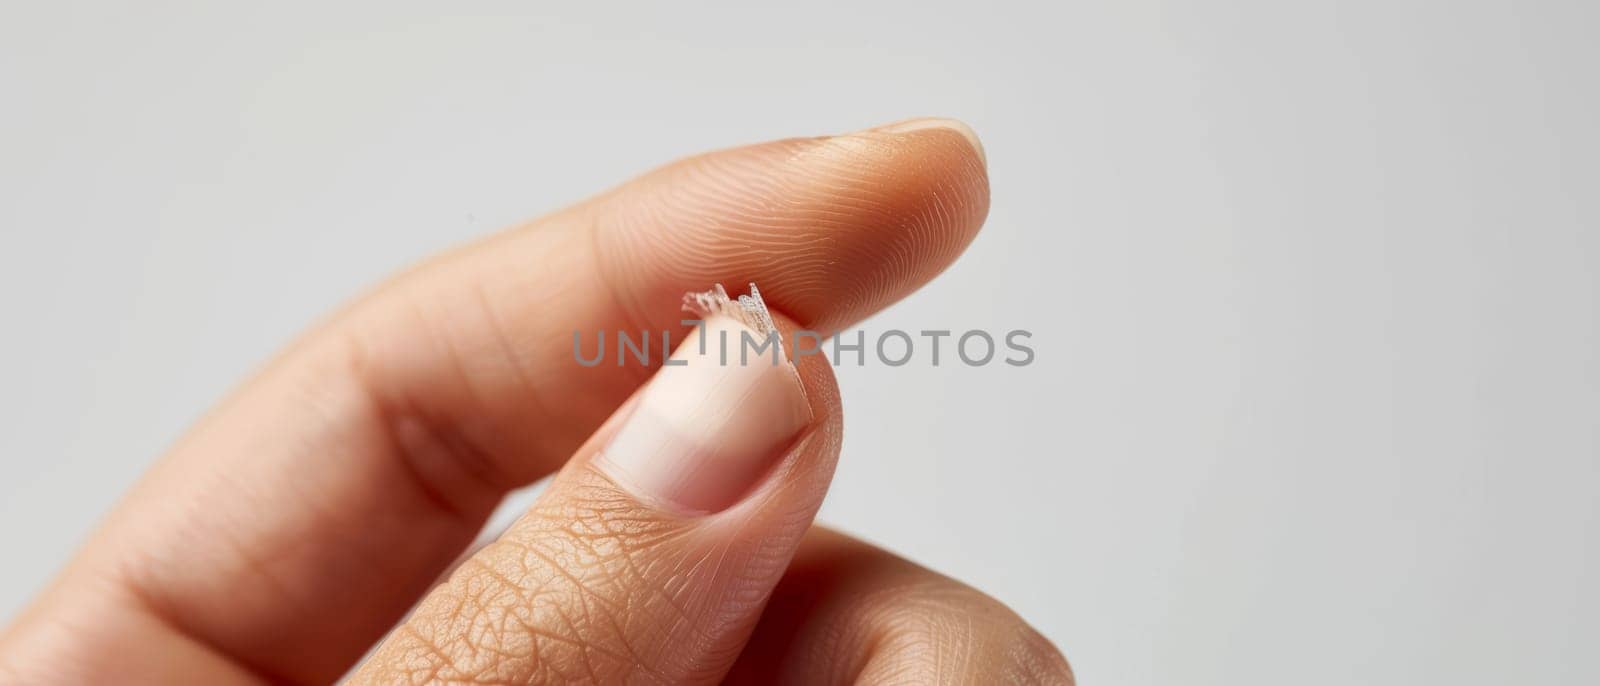 An extreme close-up of a completely shattered and splintered fingernail, conveying a sense of pain and the body's fragility. by sfinks